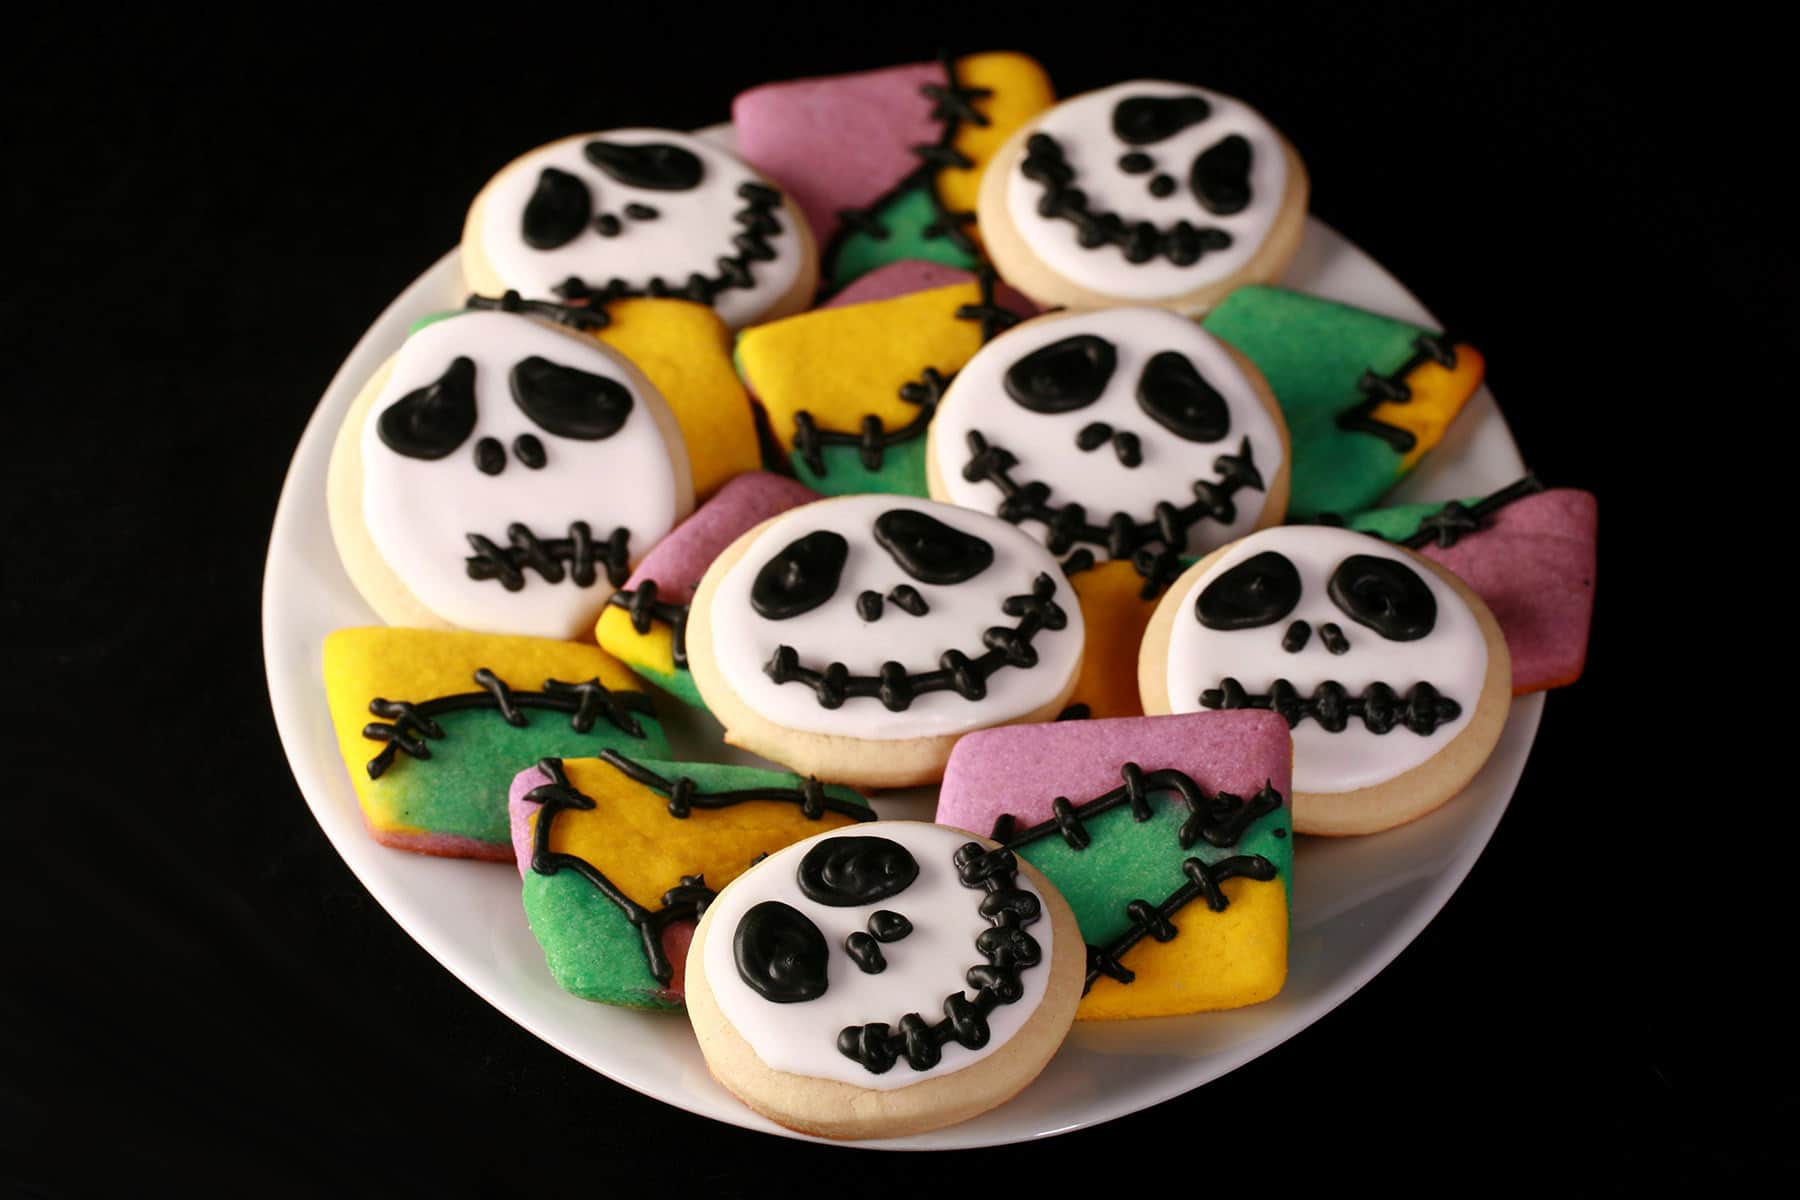 A mixed platter of Nightmare Before Christmas cookies: Jack Skellington face cookies & squares of Sally cookies that look like patchwork.